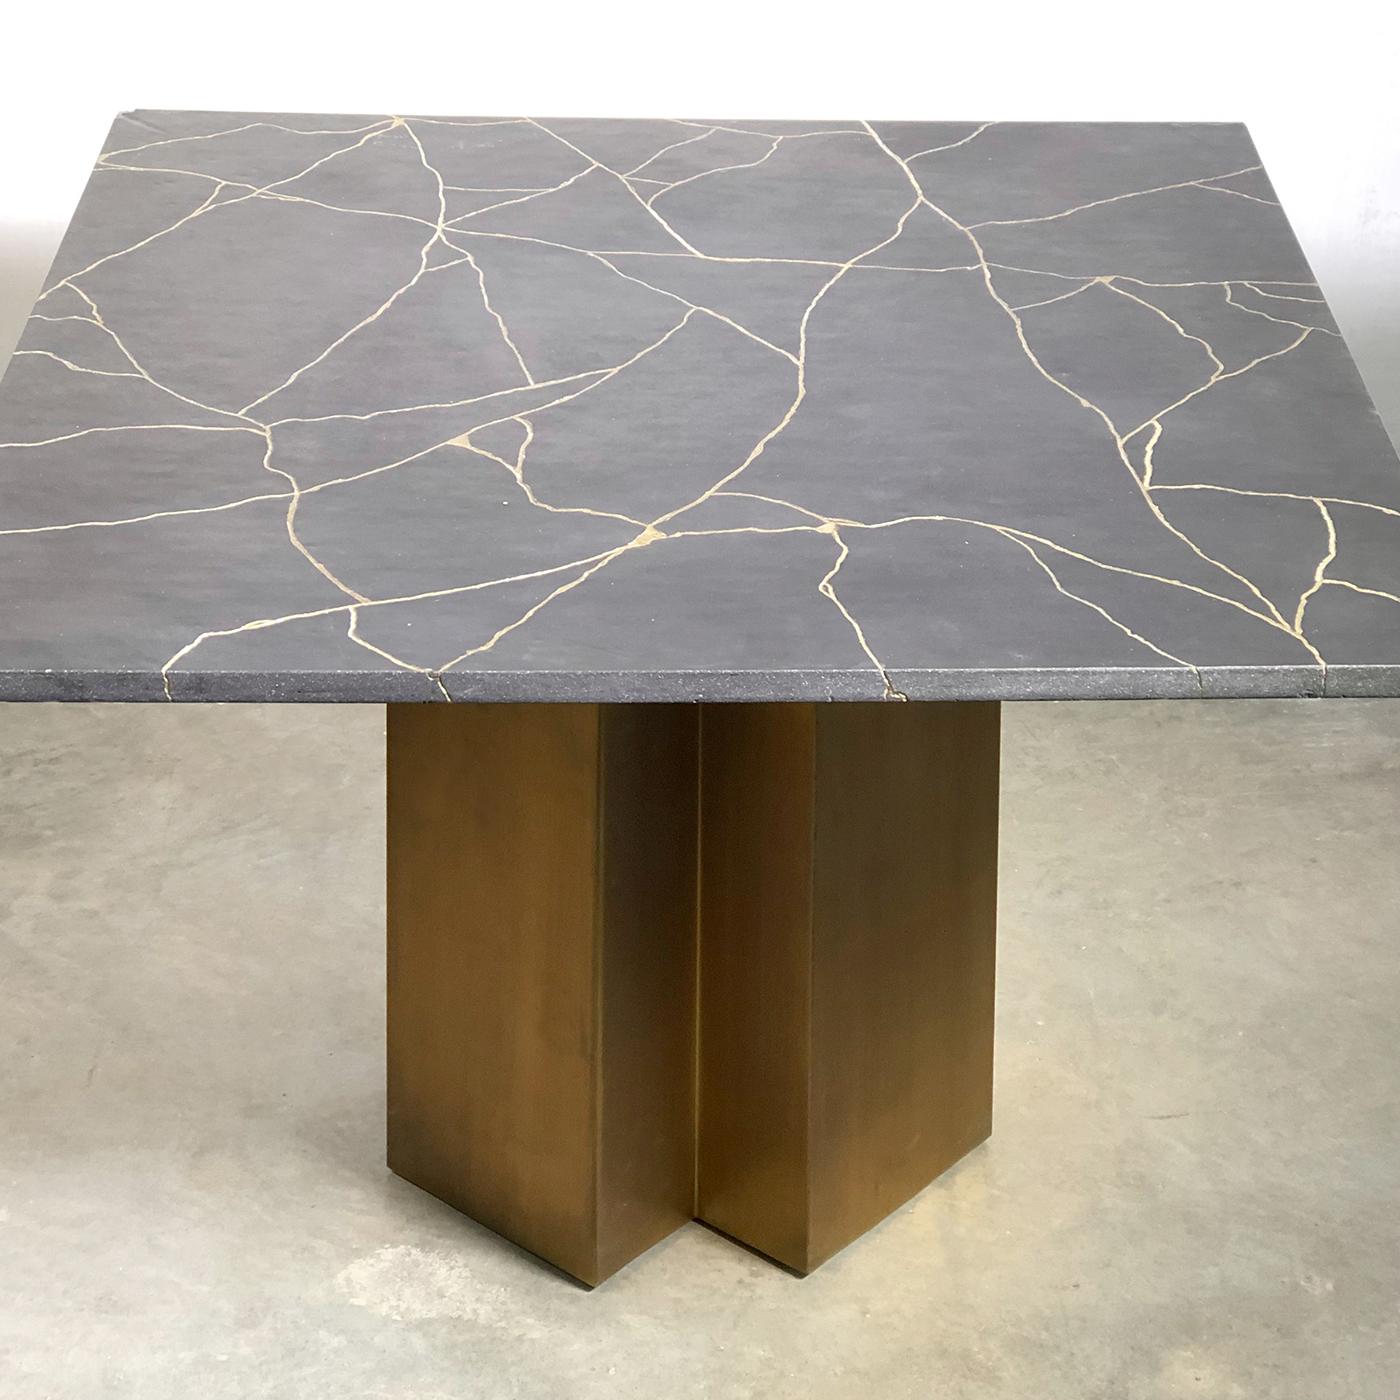 Named after the Japanese art of repairing broken pottery with precious metal to emphasize the imperfections, this superb coffee table will infuse elegance in a modern interior. Its sculptural bronze base supports a square surface made with the